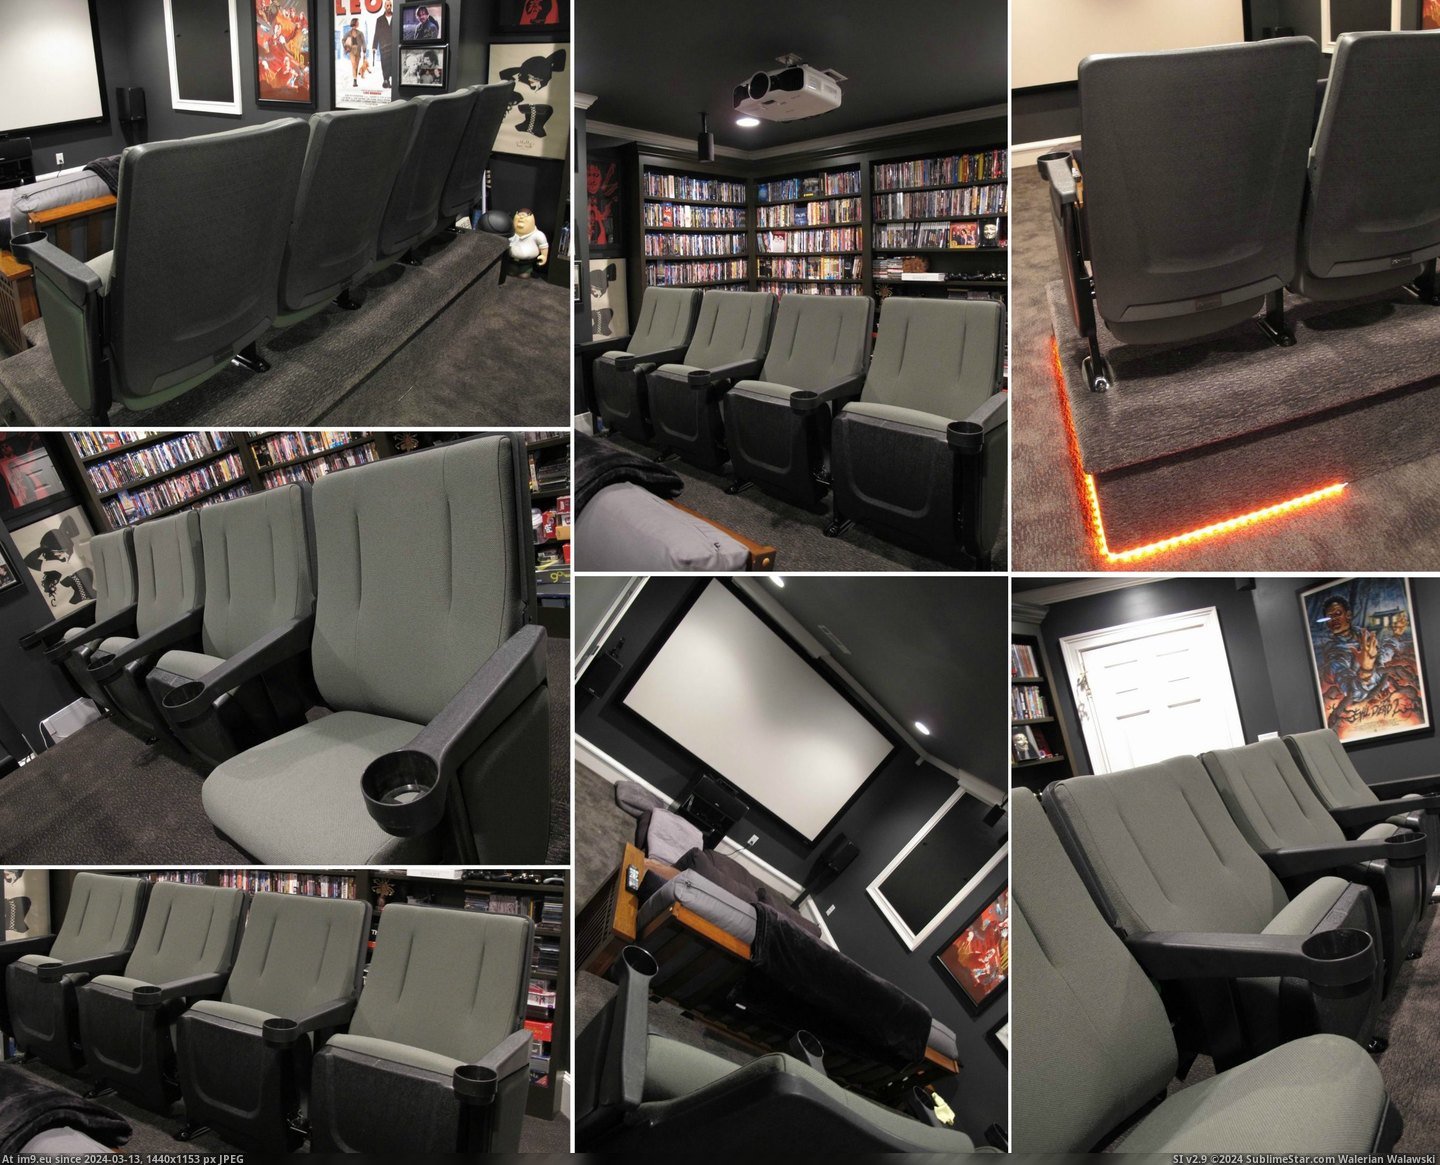 #Gaming #You #Movie #See #Theater #Added #Seats #Room #Wanted #Lot [Gaming] A lot of you wanted to see my movie-gaming room after the theater seats were added. Well...here ya go. :-) Pic. (Изображение из альбом My r/GAMING favs))